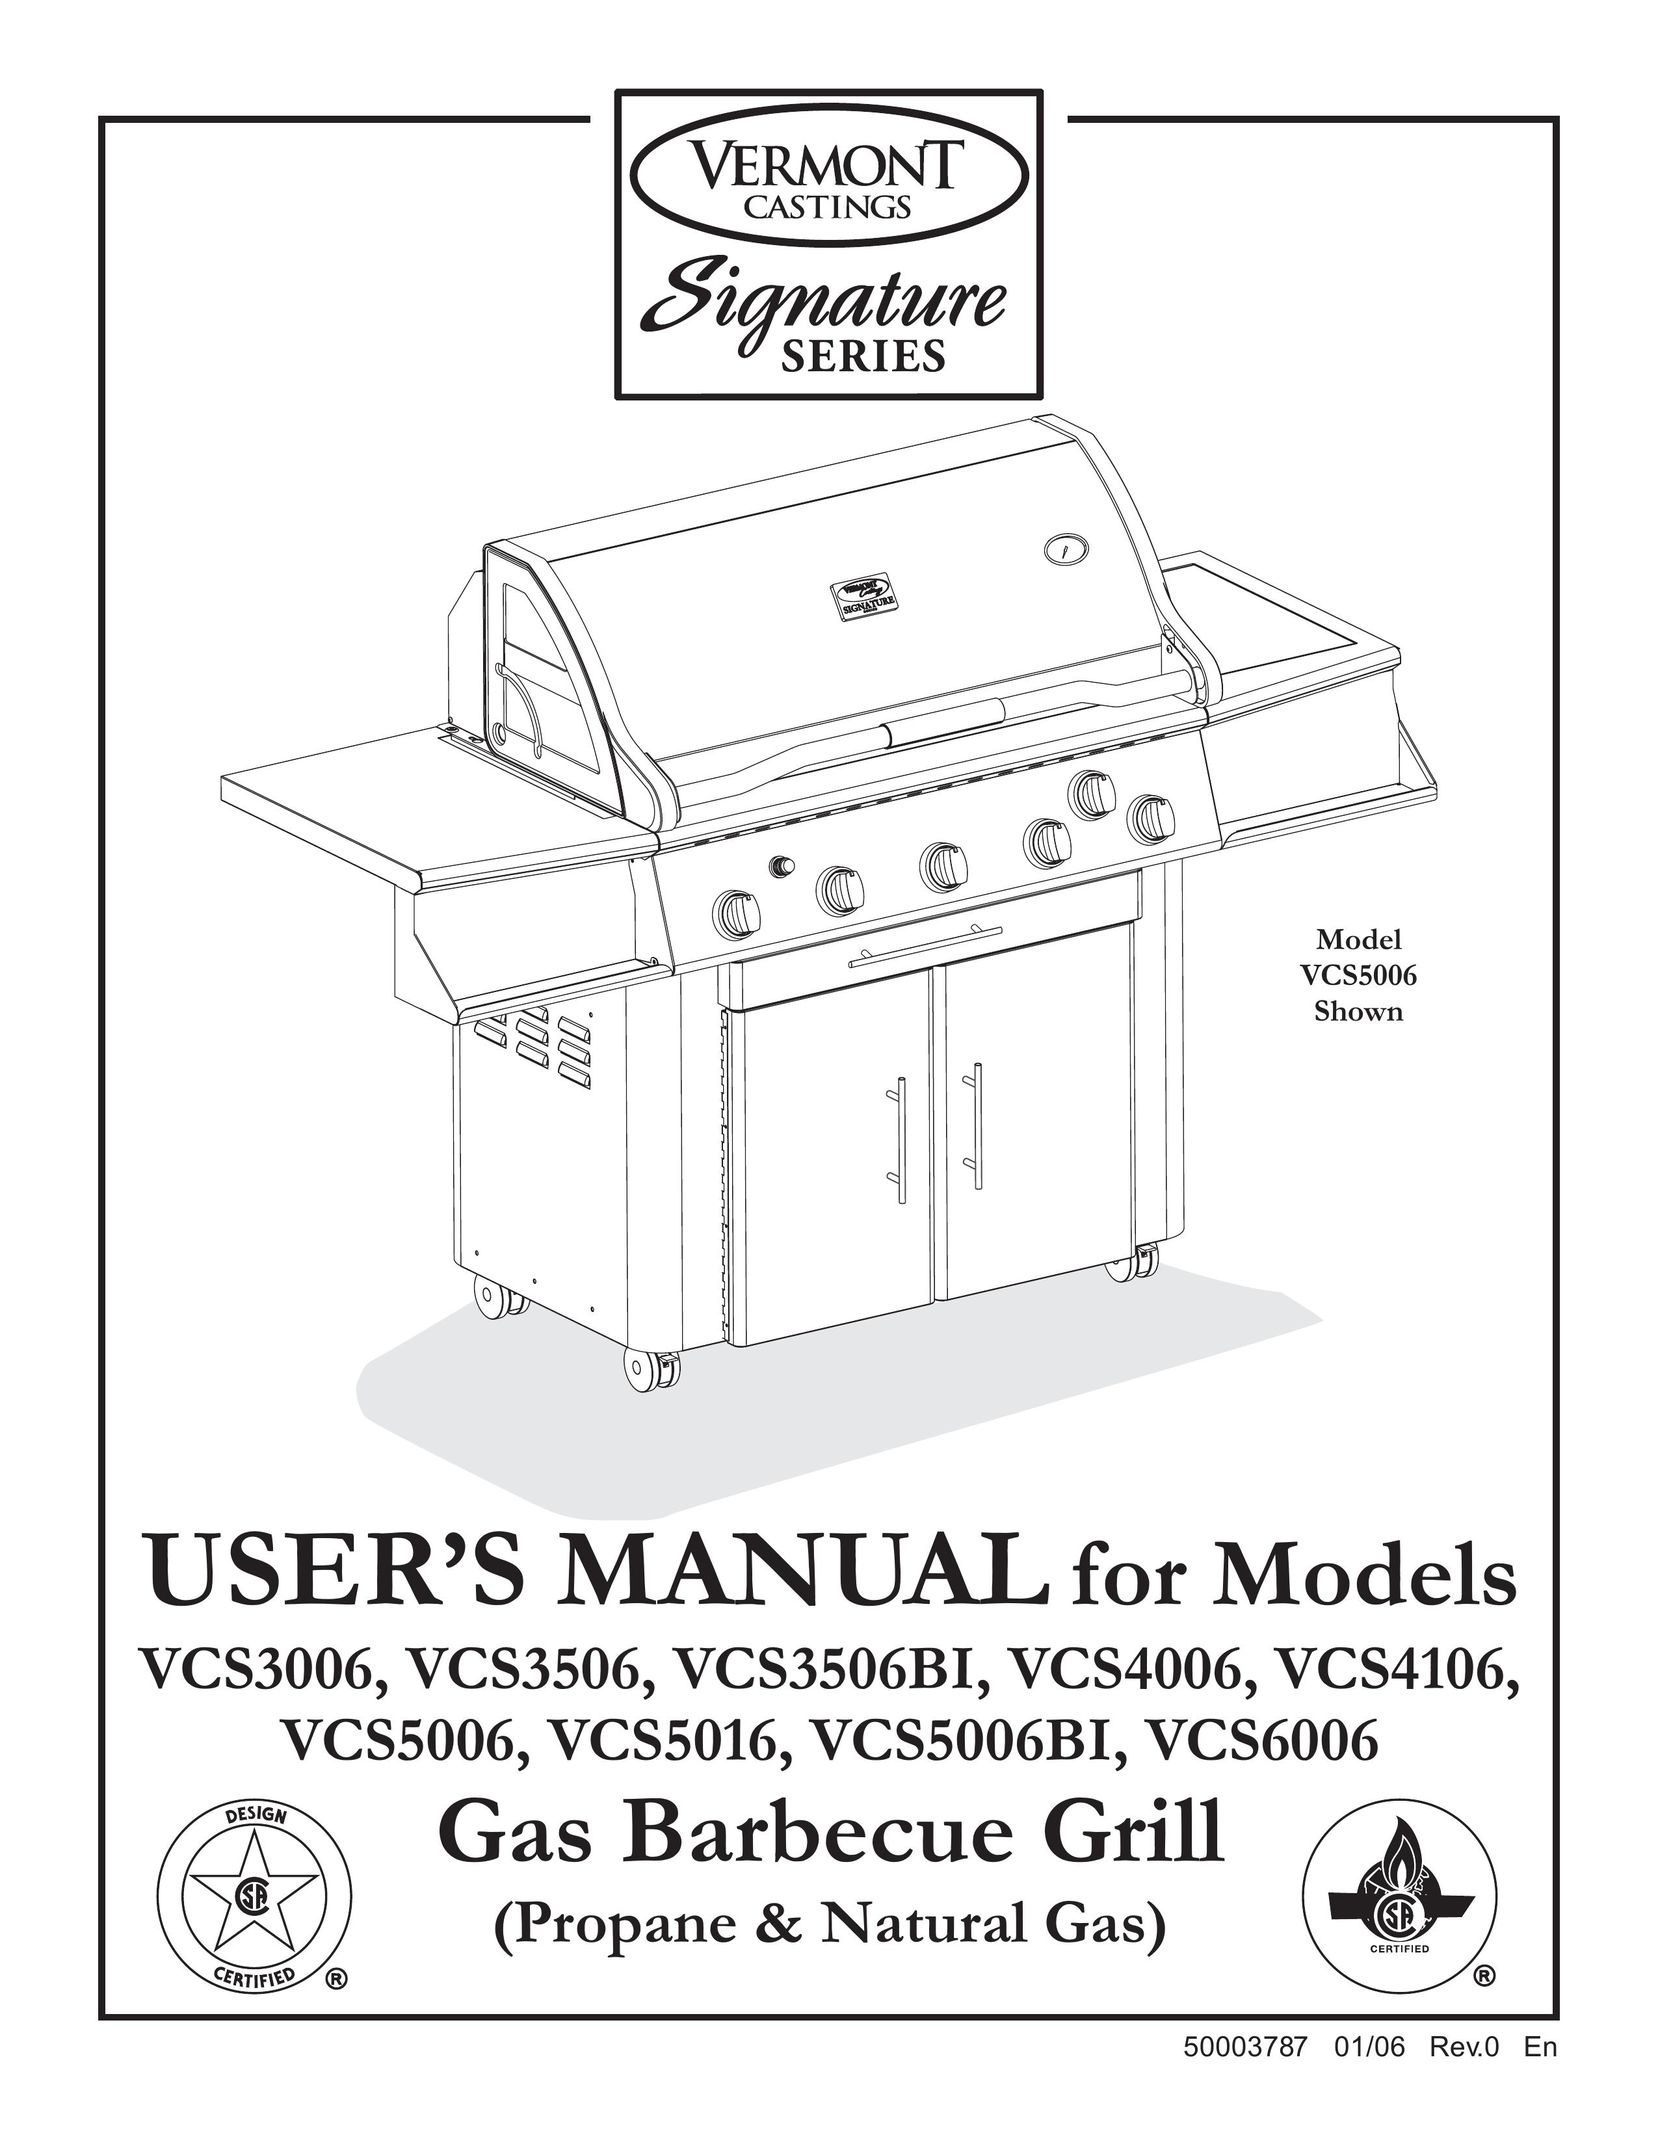 Vermont Casting VCS6006 Griddle User Manual